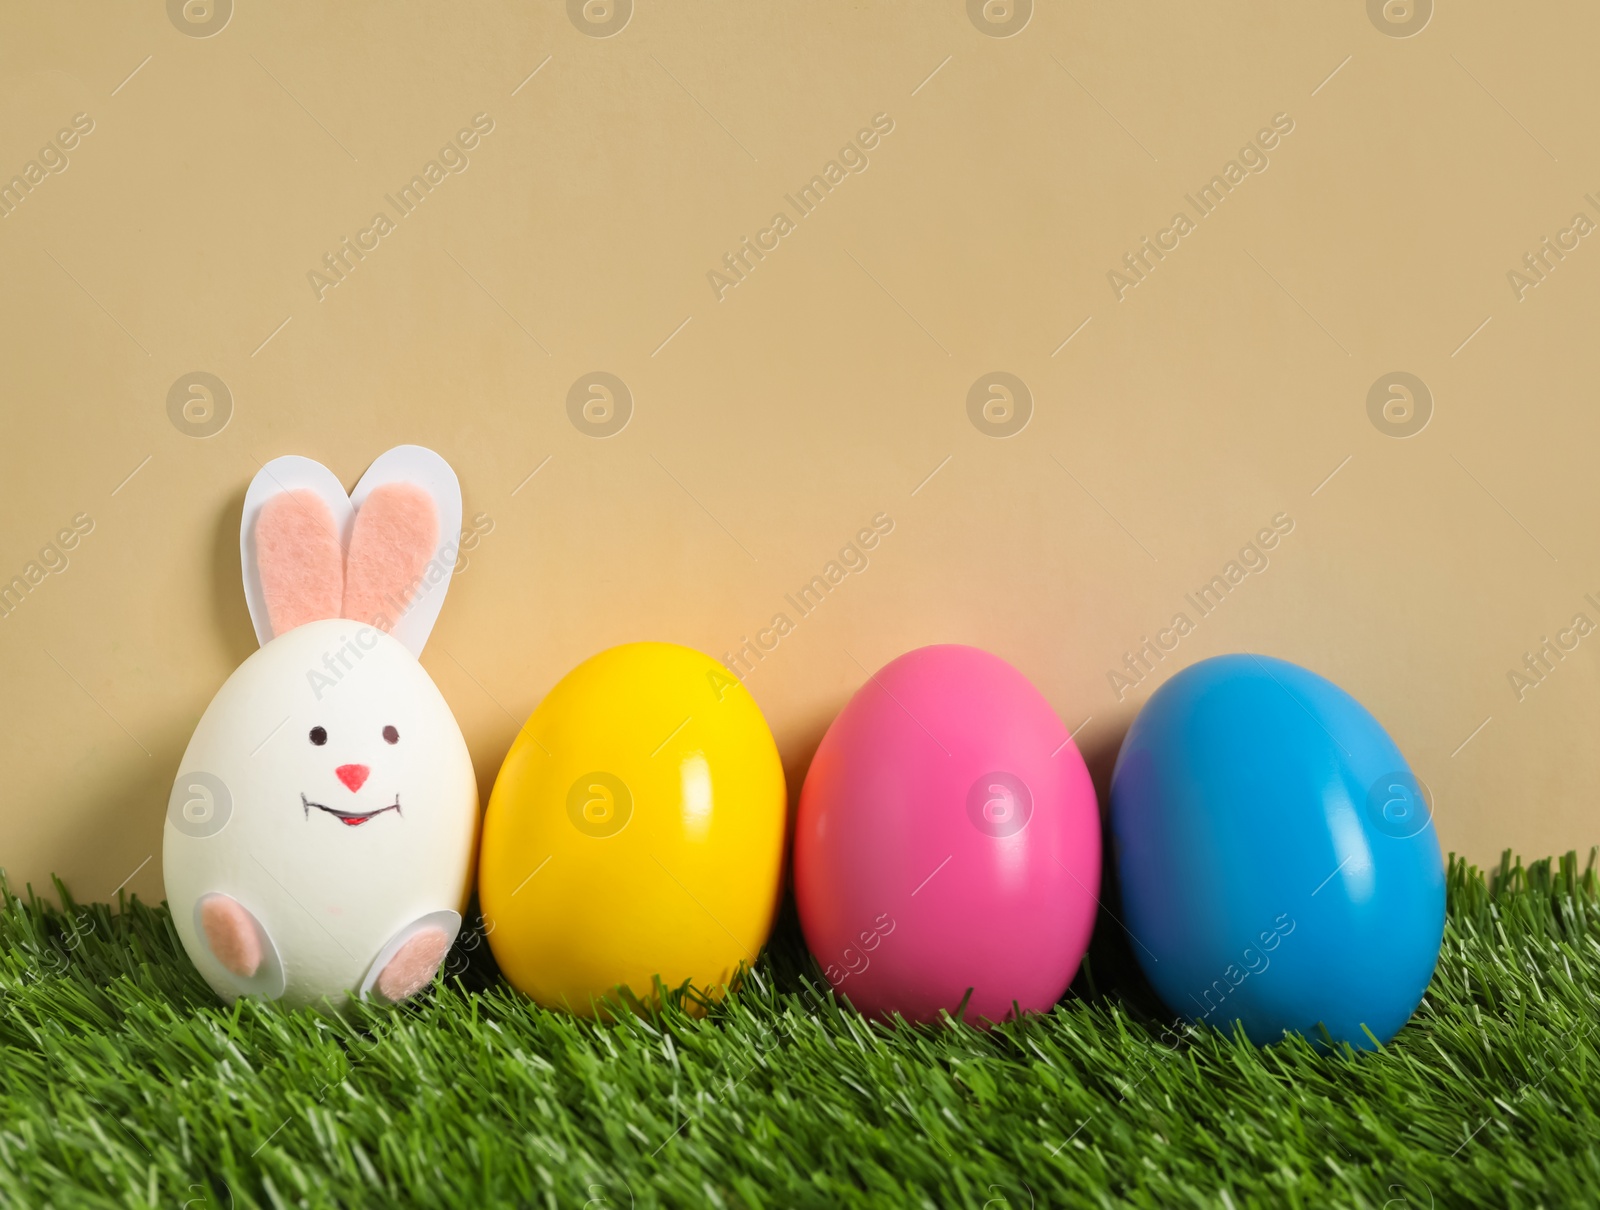 Photo of Bright eggs and white one as Easter bunny on green grass against beige background